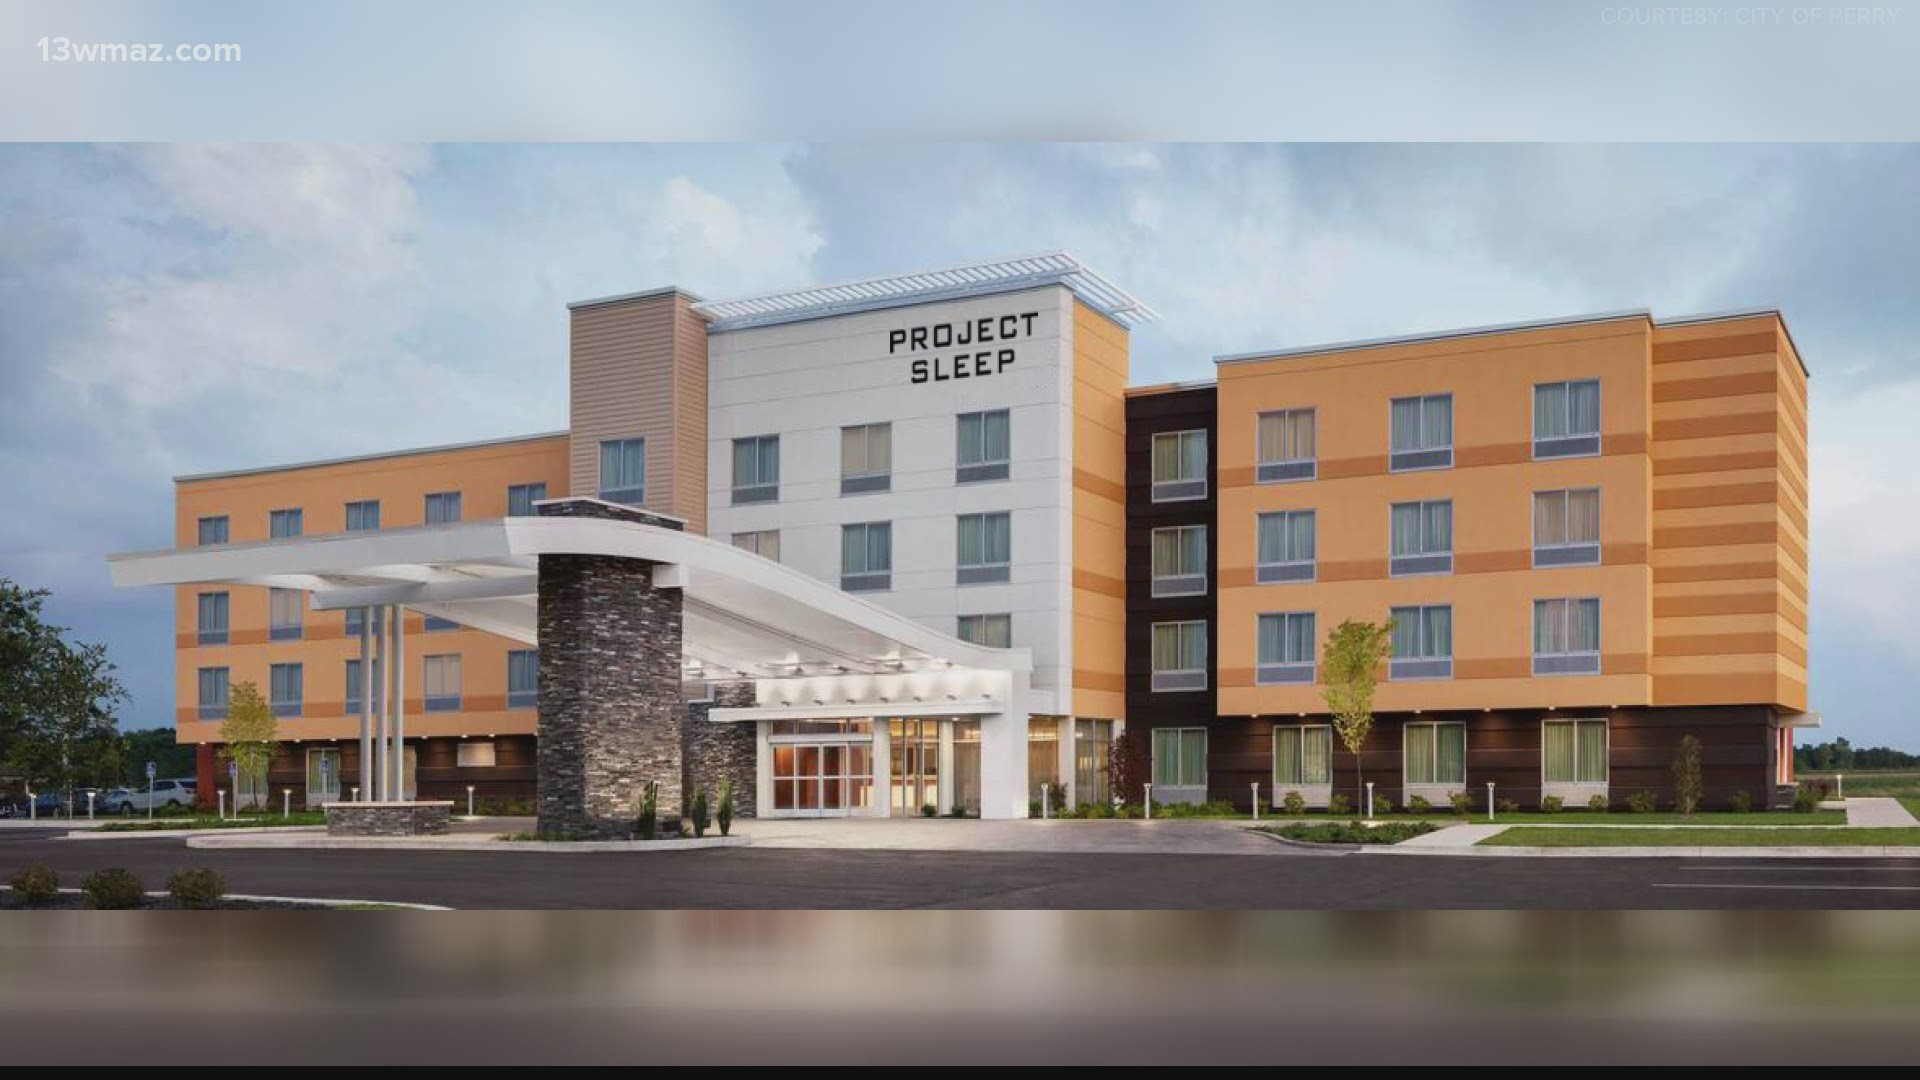 After almost two years, developers announced they're in the next phase of building a new hotel on site at the Georgia National Fairgrounds